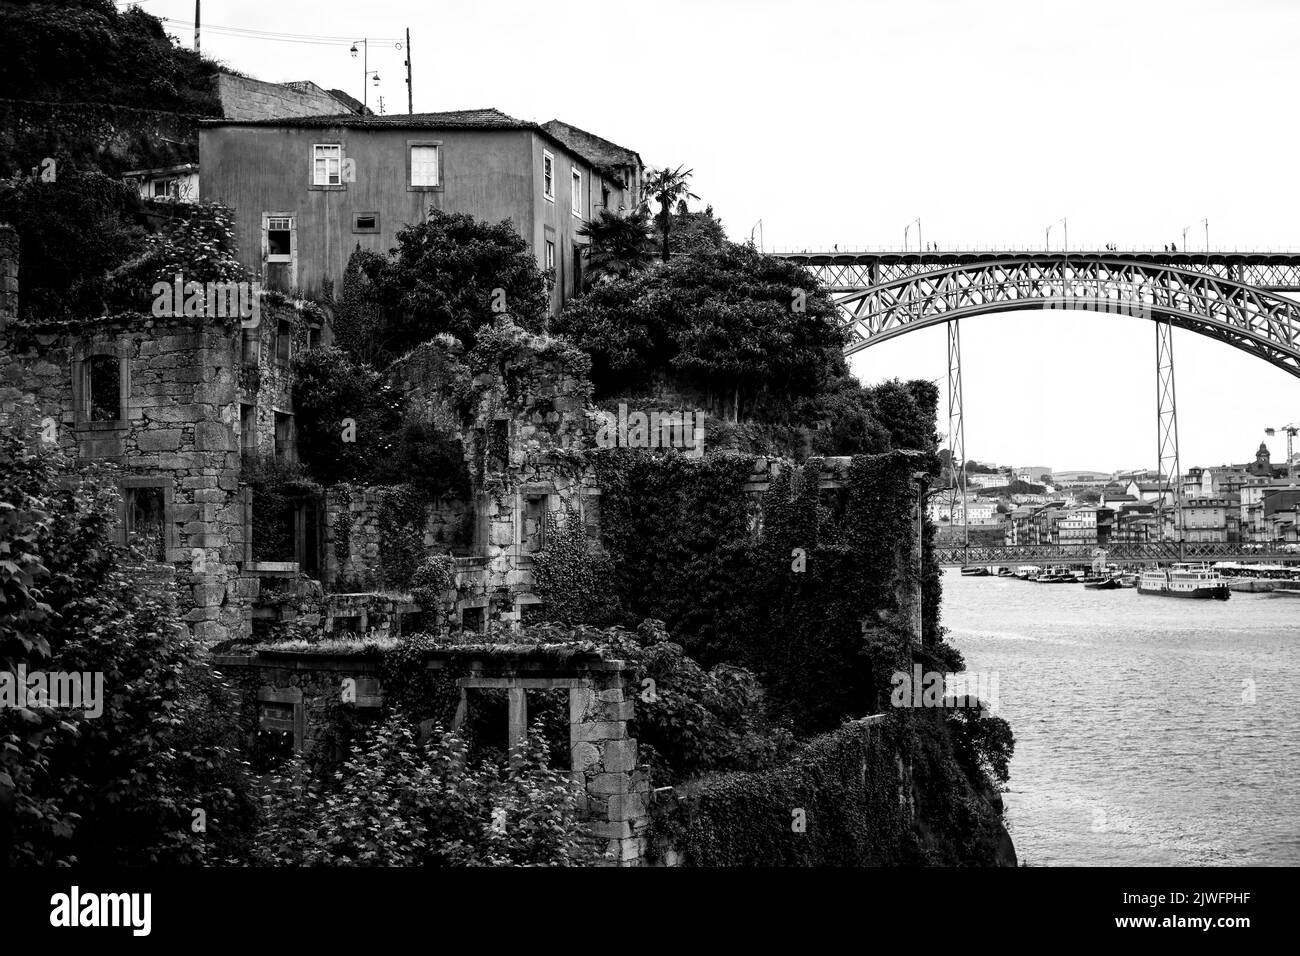 Abandoned ruins of a building on the banks of the Douro with Dom Luis I Bridge in the background in Porto, Portugal. Black and  white photo. Stock Photo